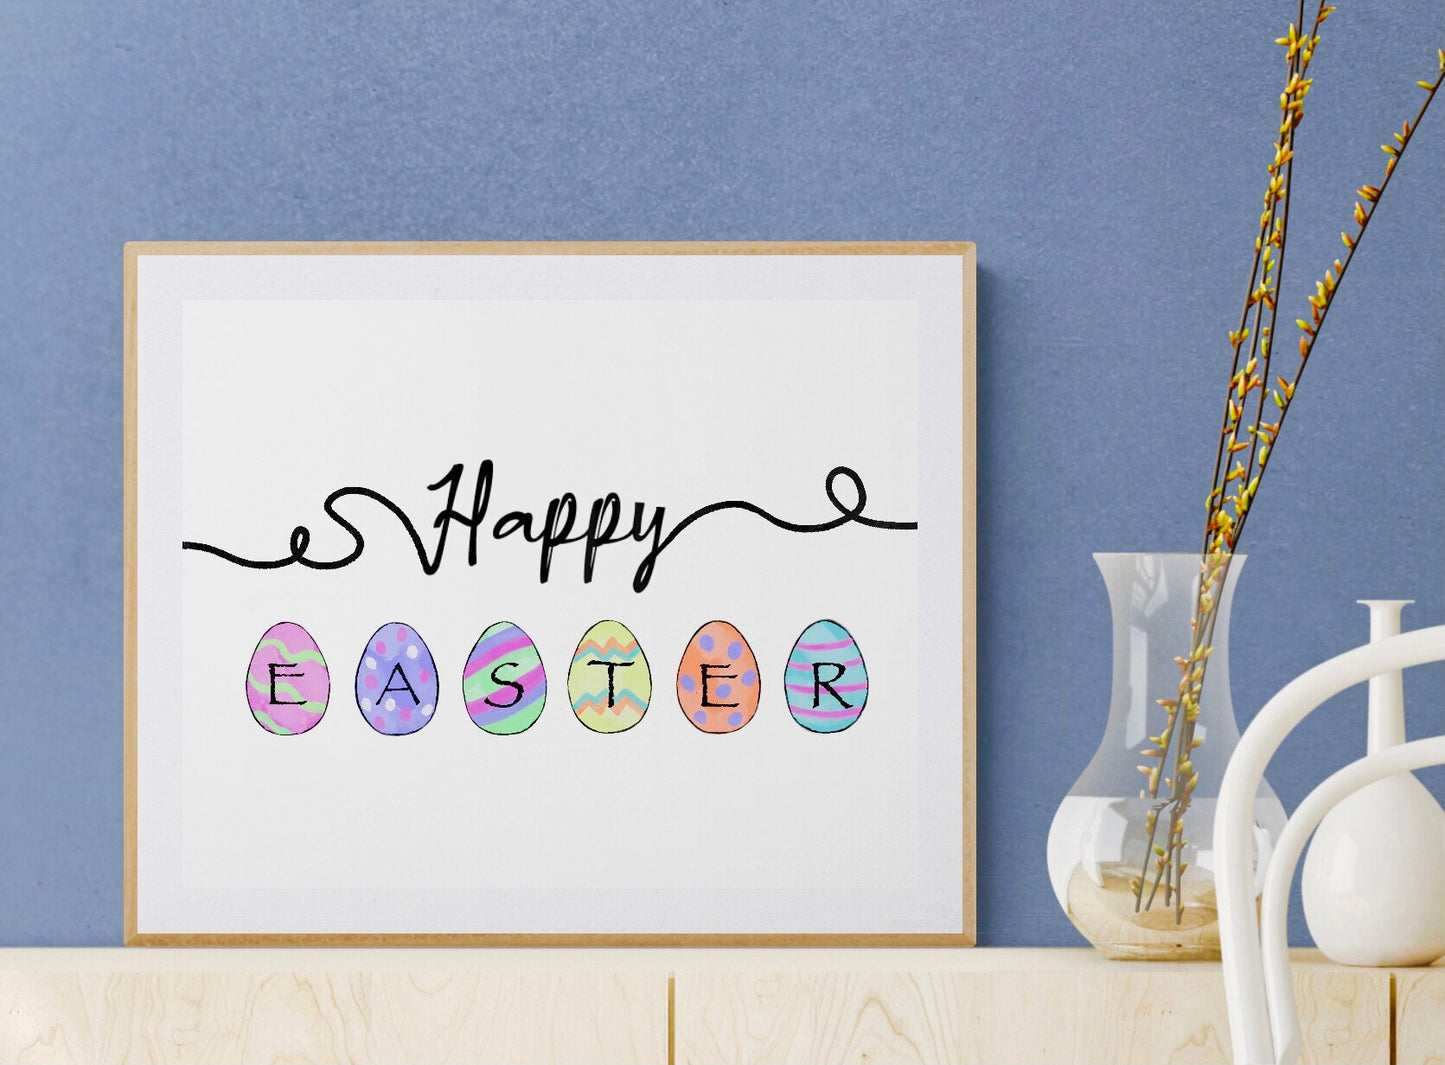 Easter Egg Print, Easter Home Decor, Happy Easter, Easter Wall Art, Holiday Decor, Easter Gift, Easter Bunny Wall Art, Easter Painting